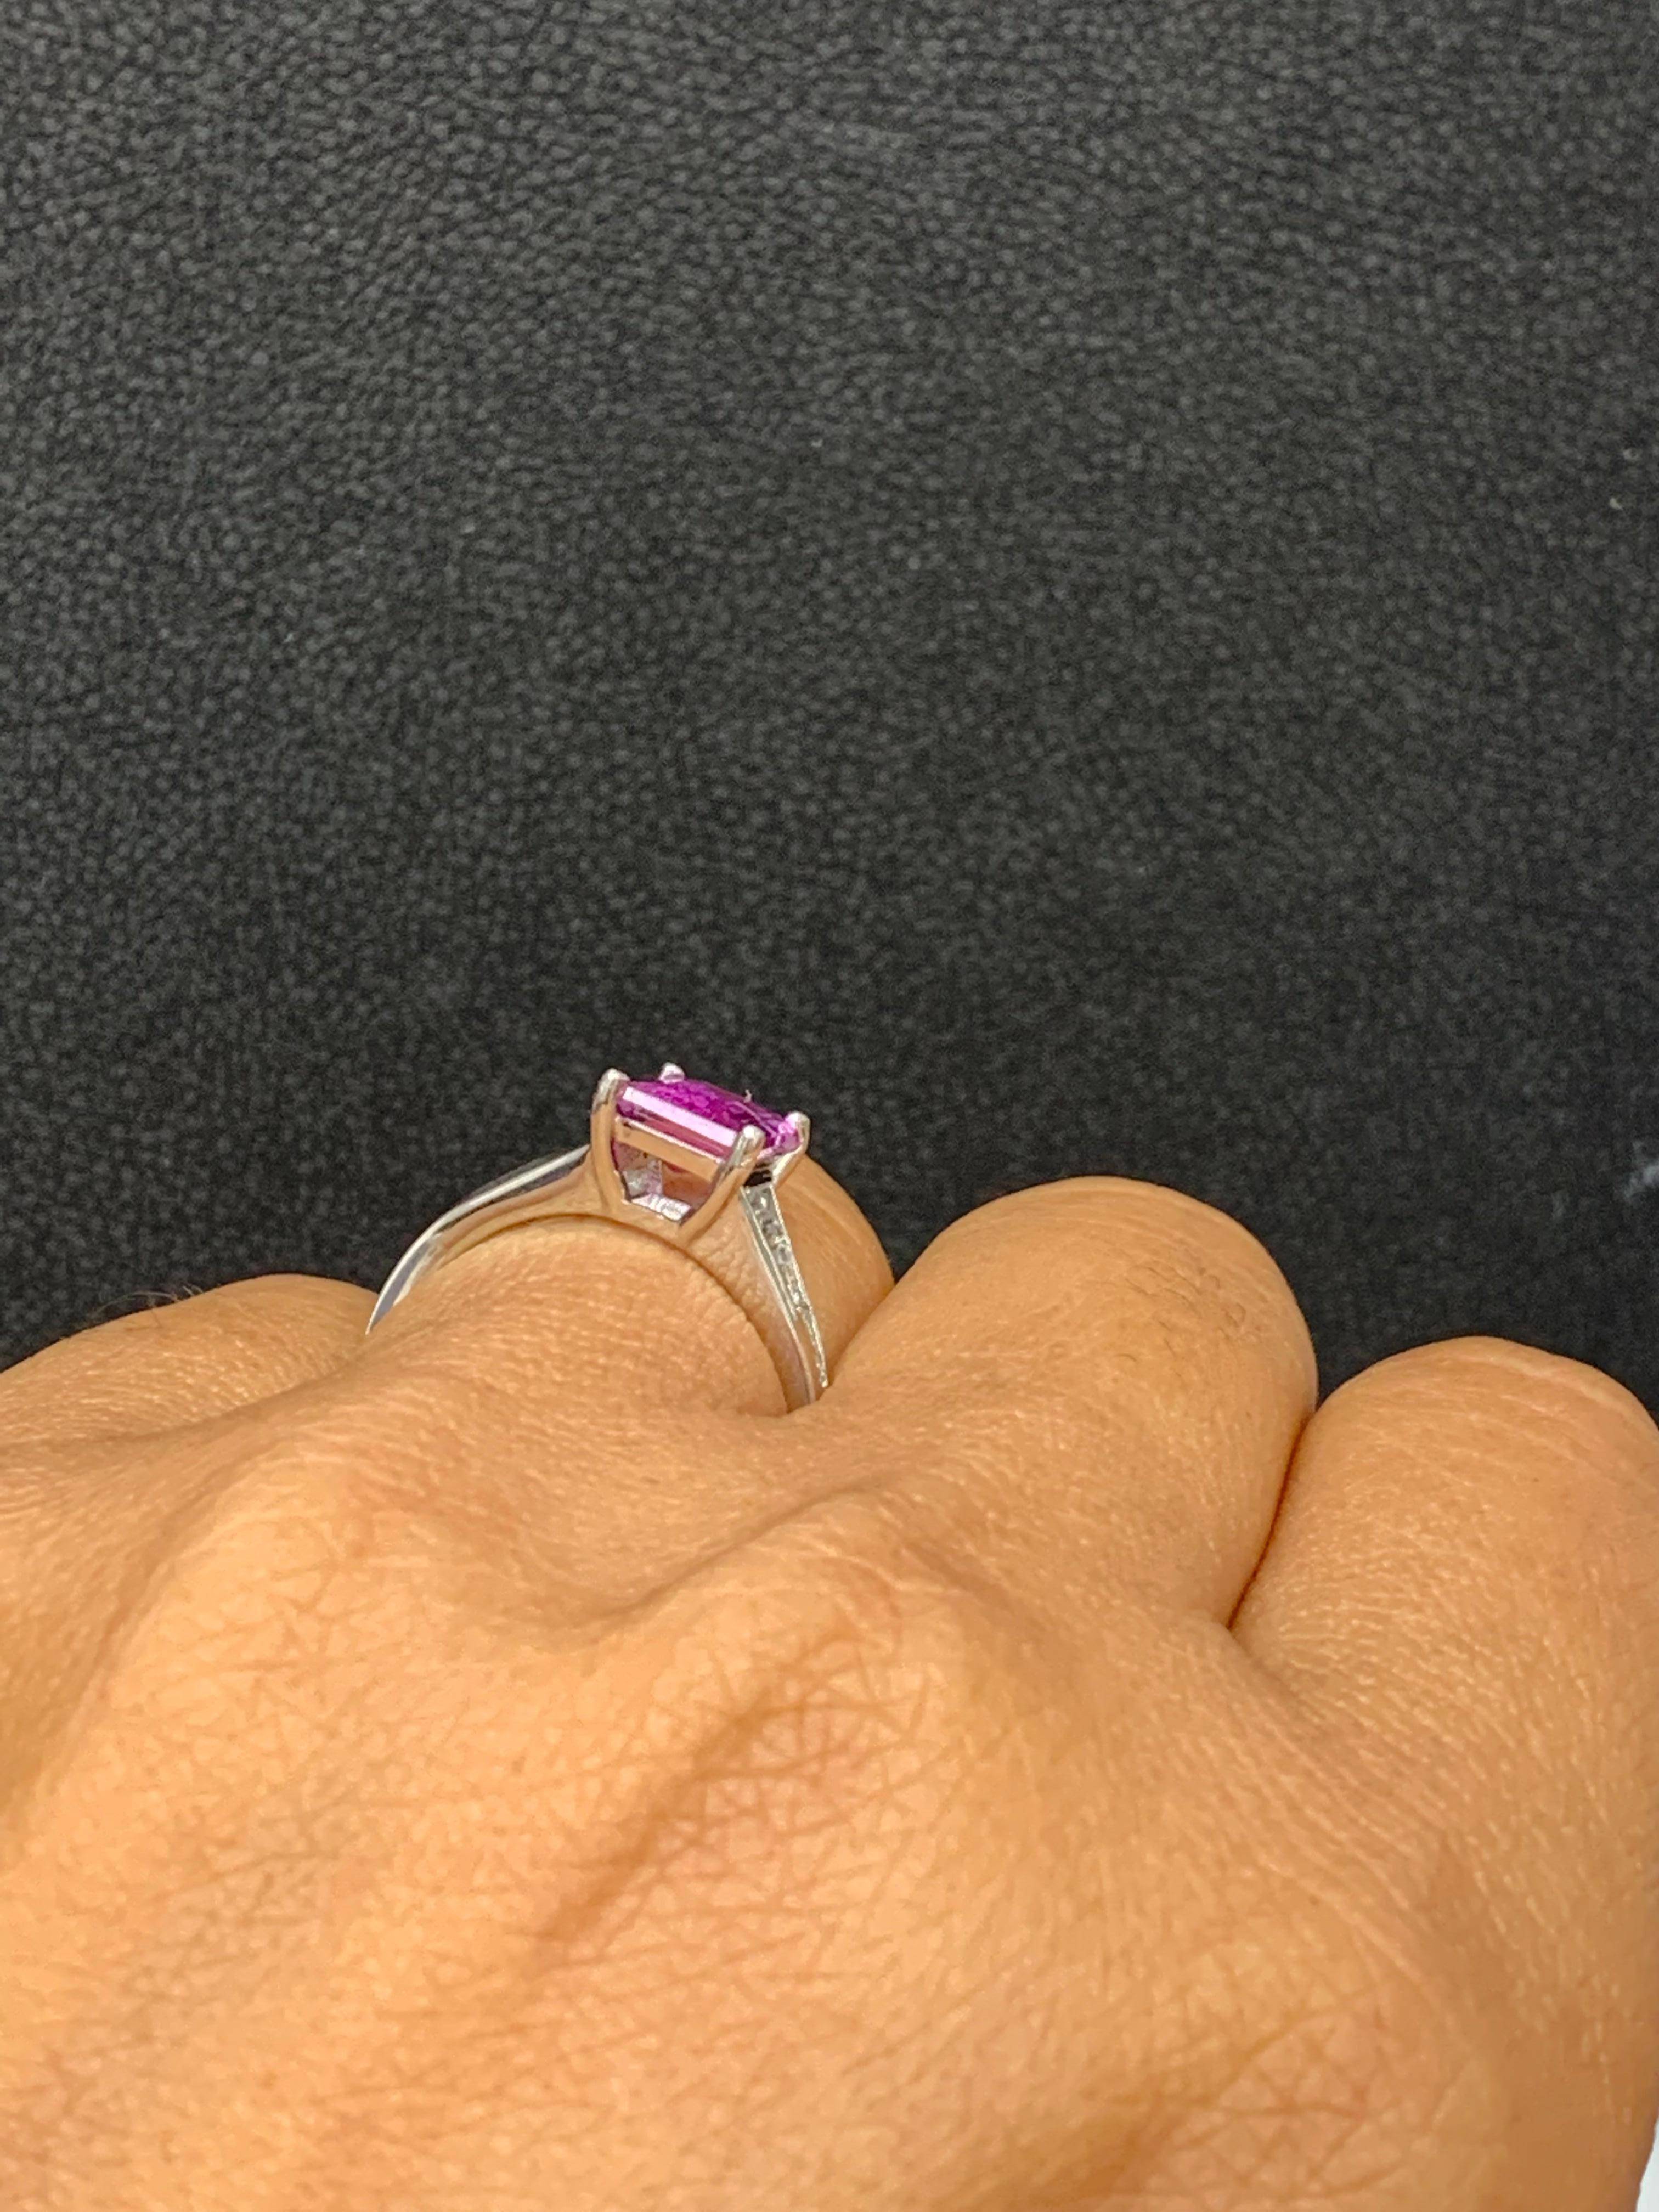 2.21 Carat Emerald Cut Pink Sapphire and Diamond Engagement Ring in Platinum For Sale 1